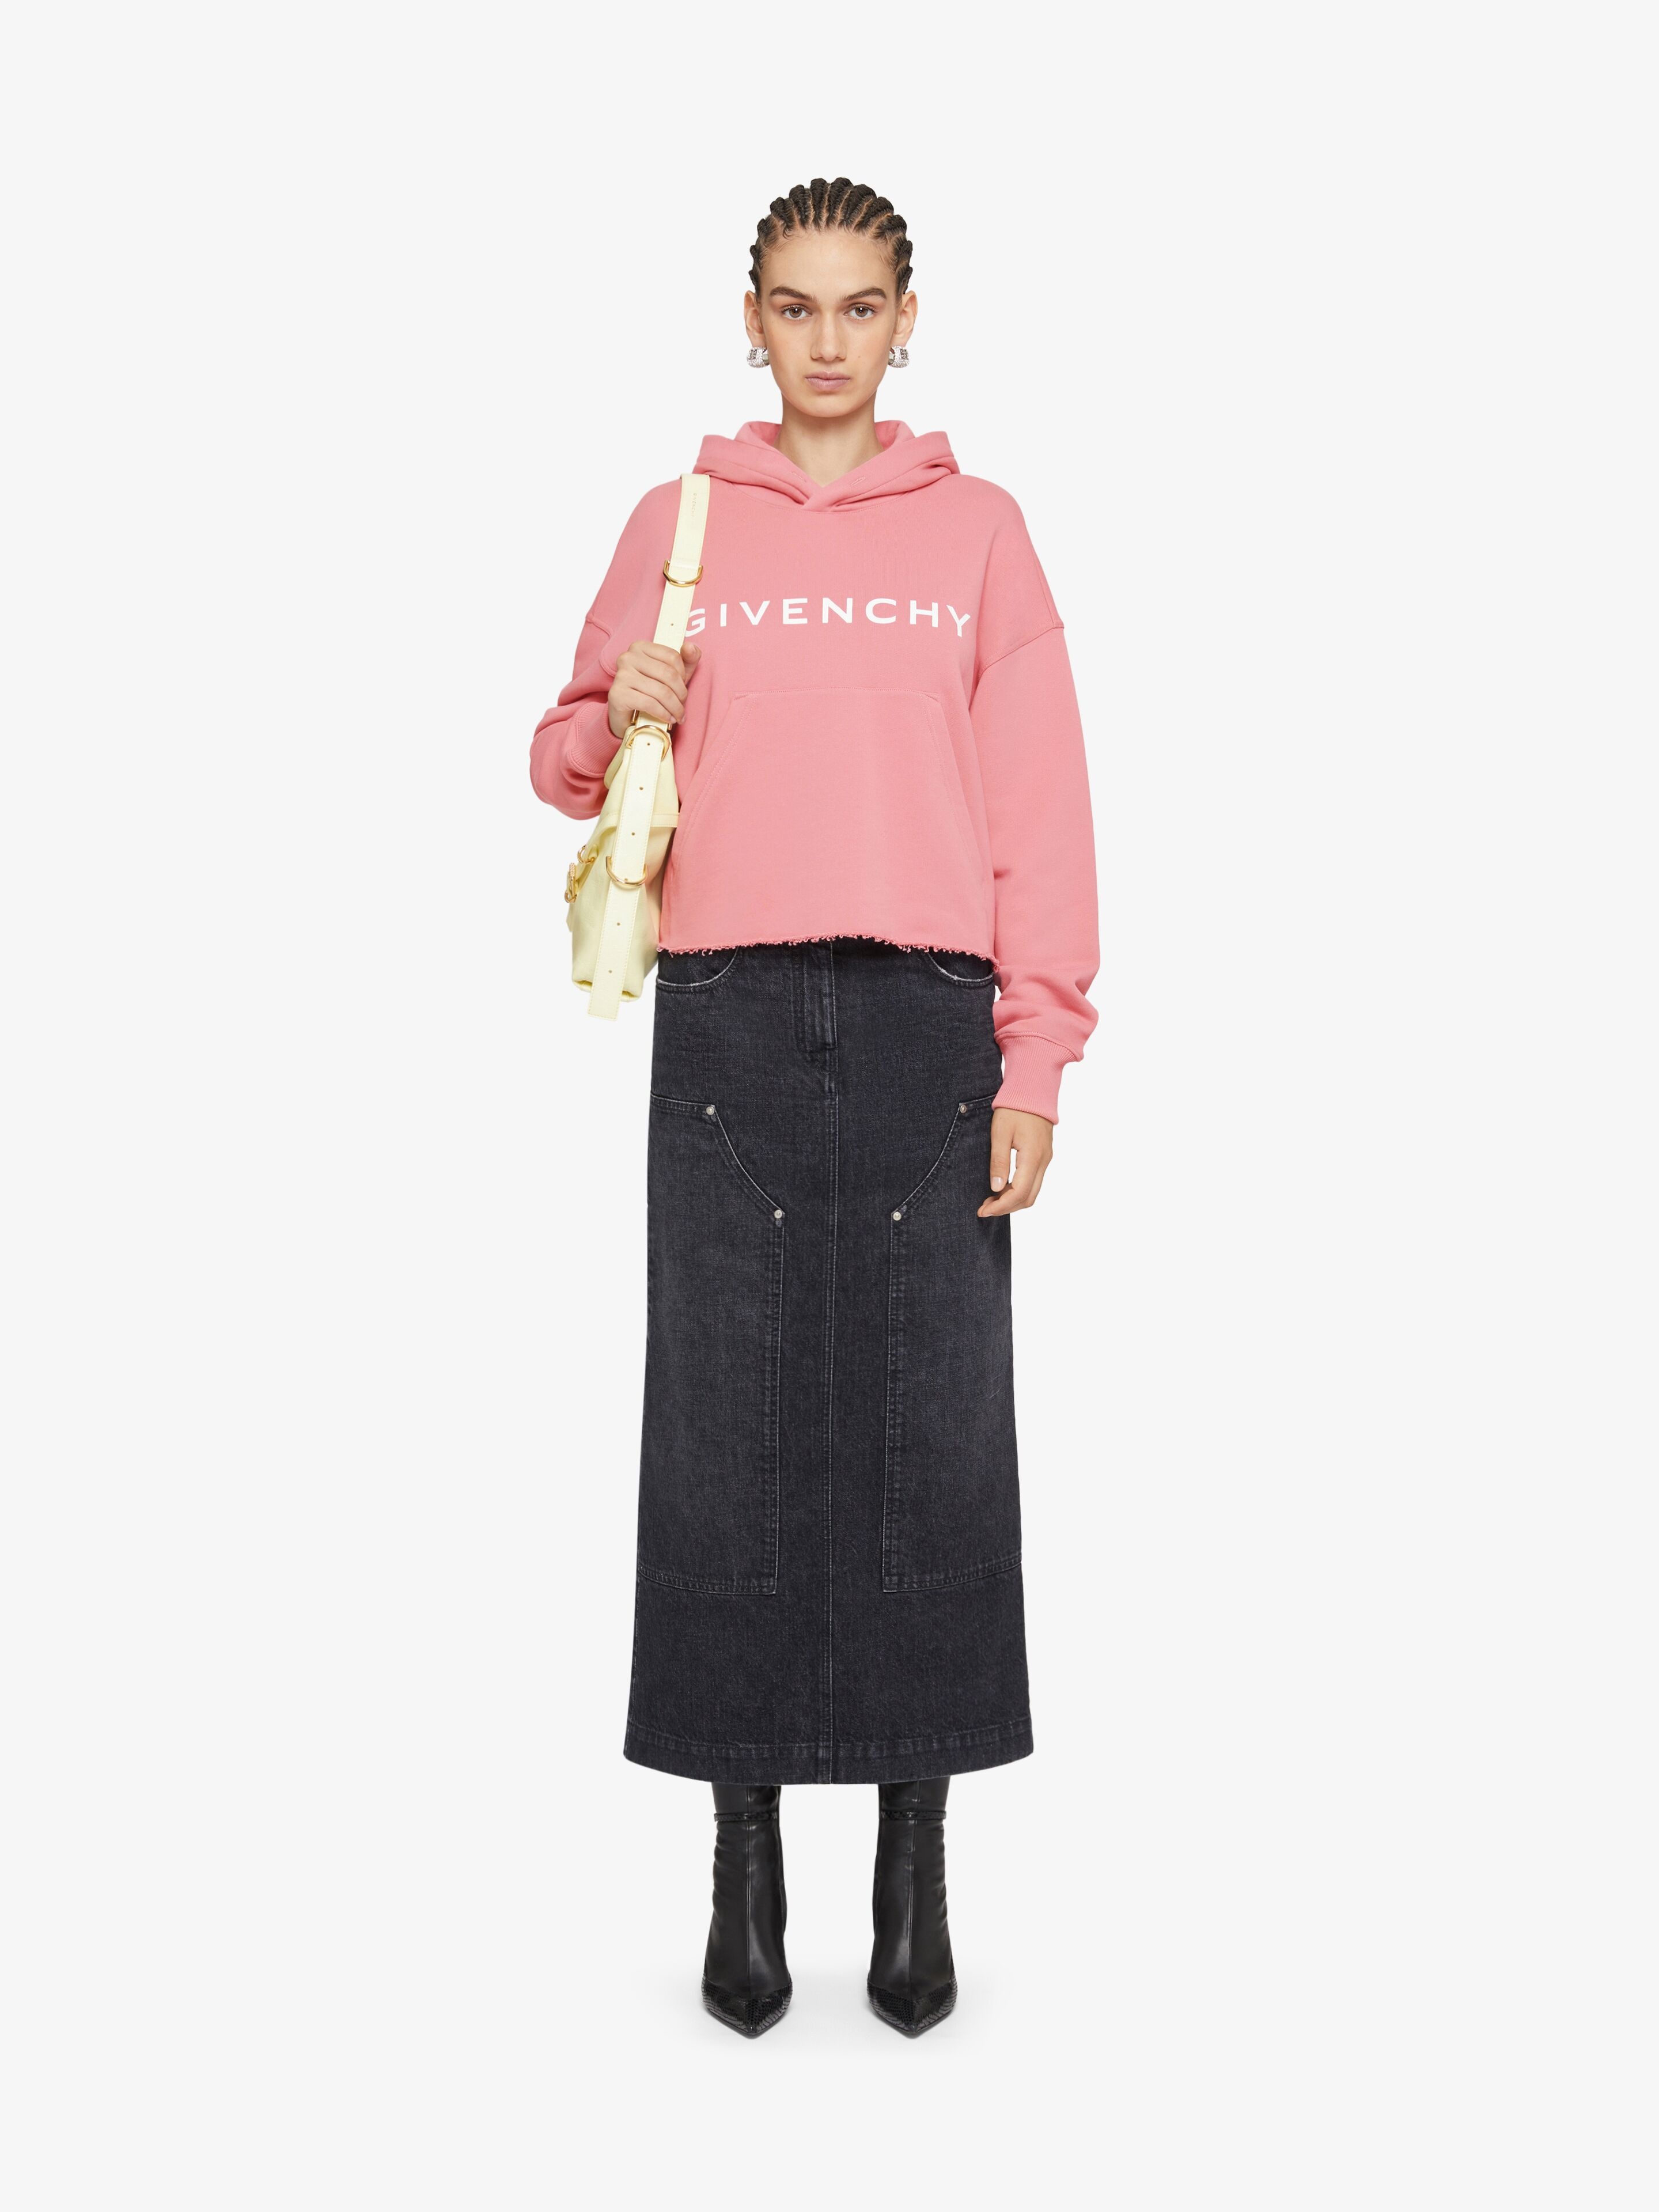 GIVENCHY ARCHETYPE CROPPED HOODIE IN FLEECE - 2